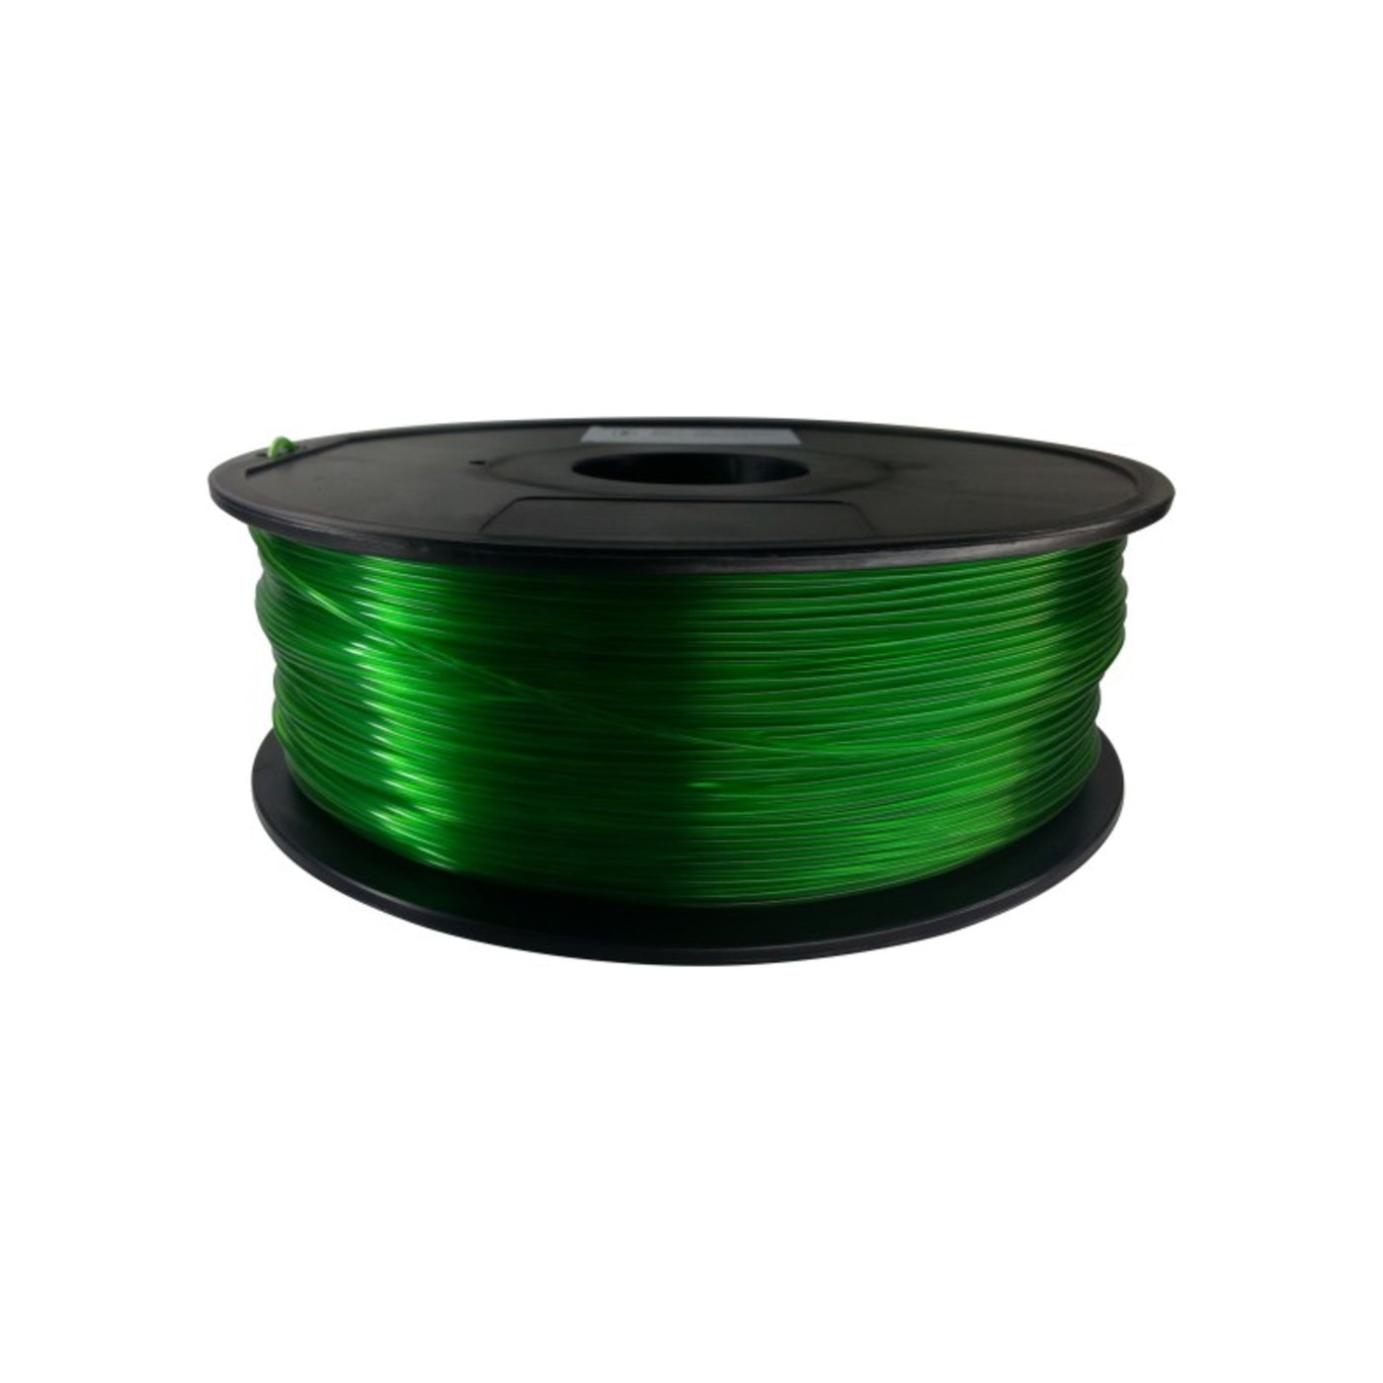 ABS Filament: What is it and How Does it Compare to Other 3D Printing Materials?